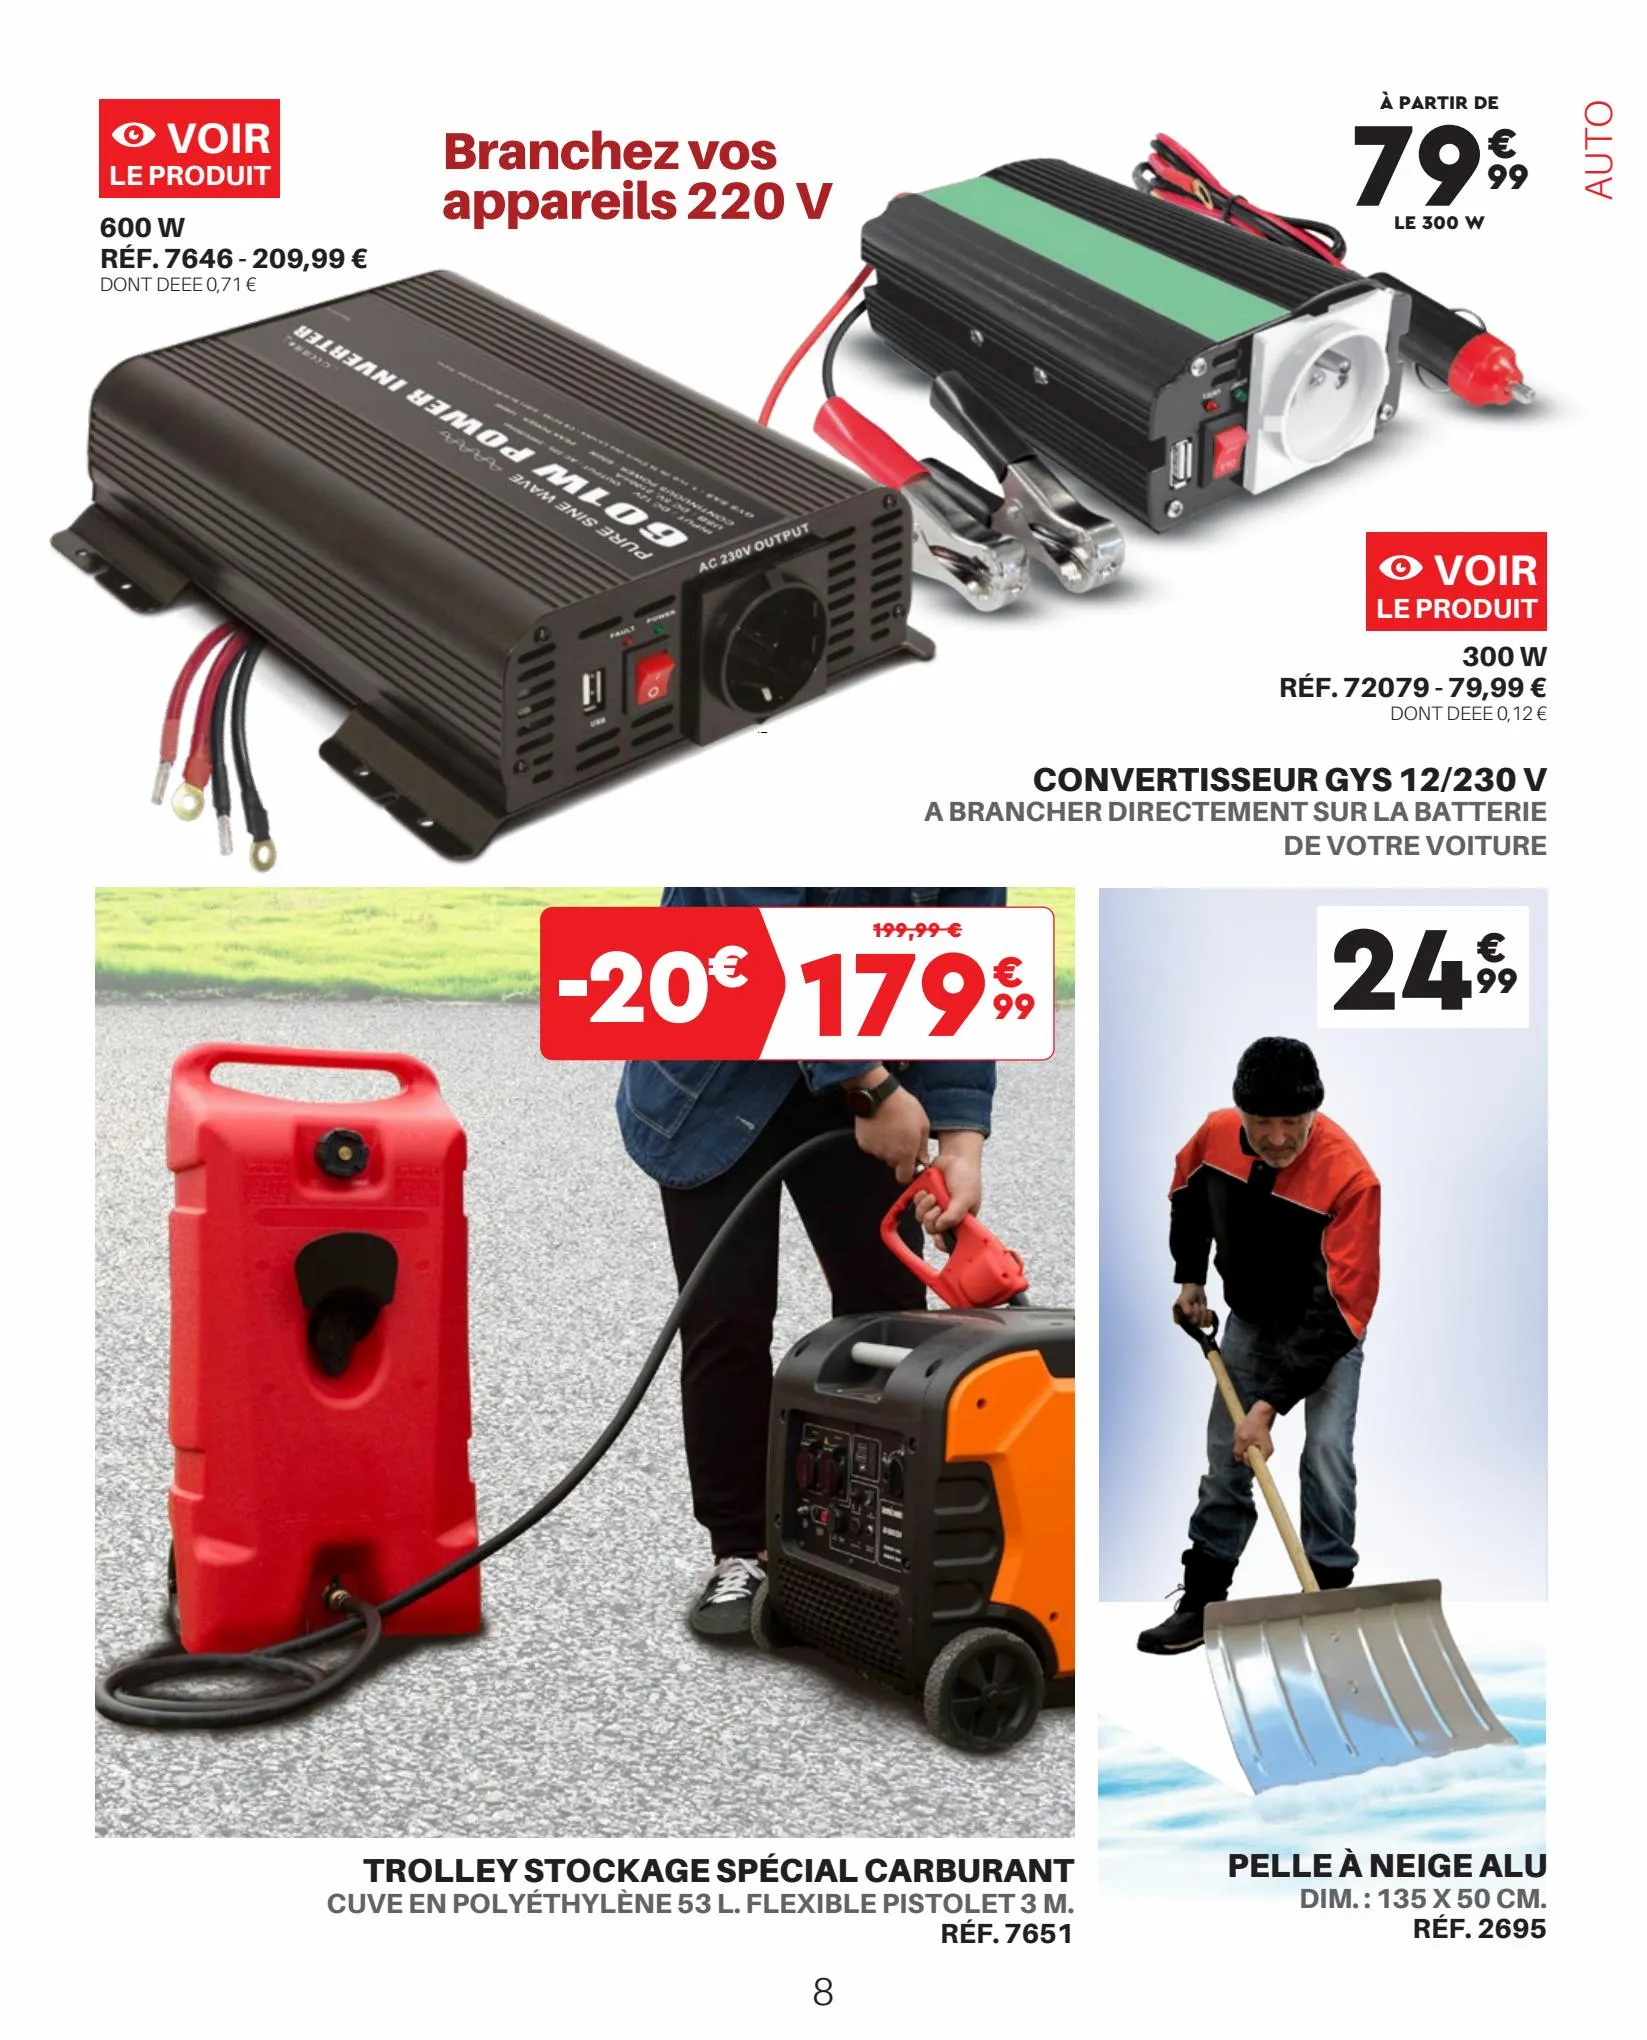 Catalogue AUTO OUTILLAGE LES OFFERES SPECIALES, page 00008